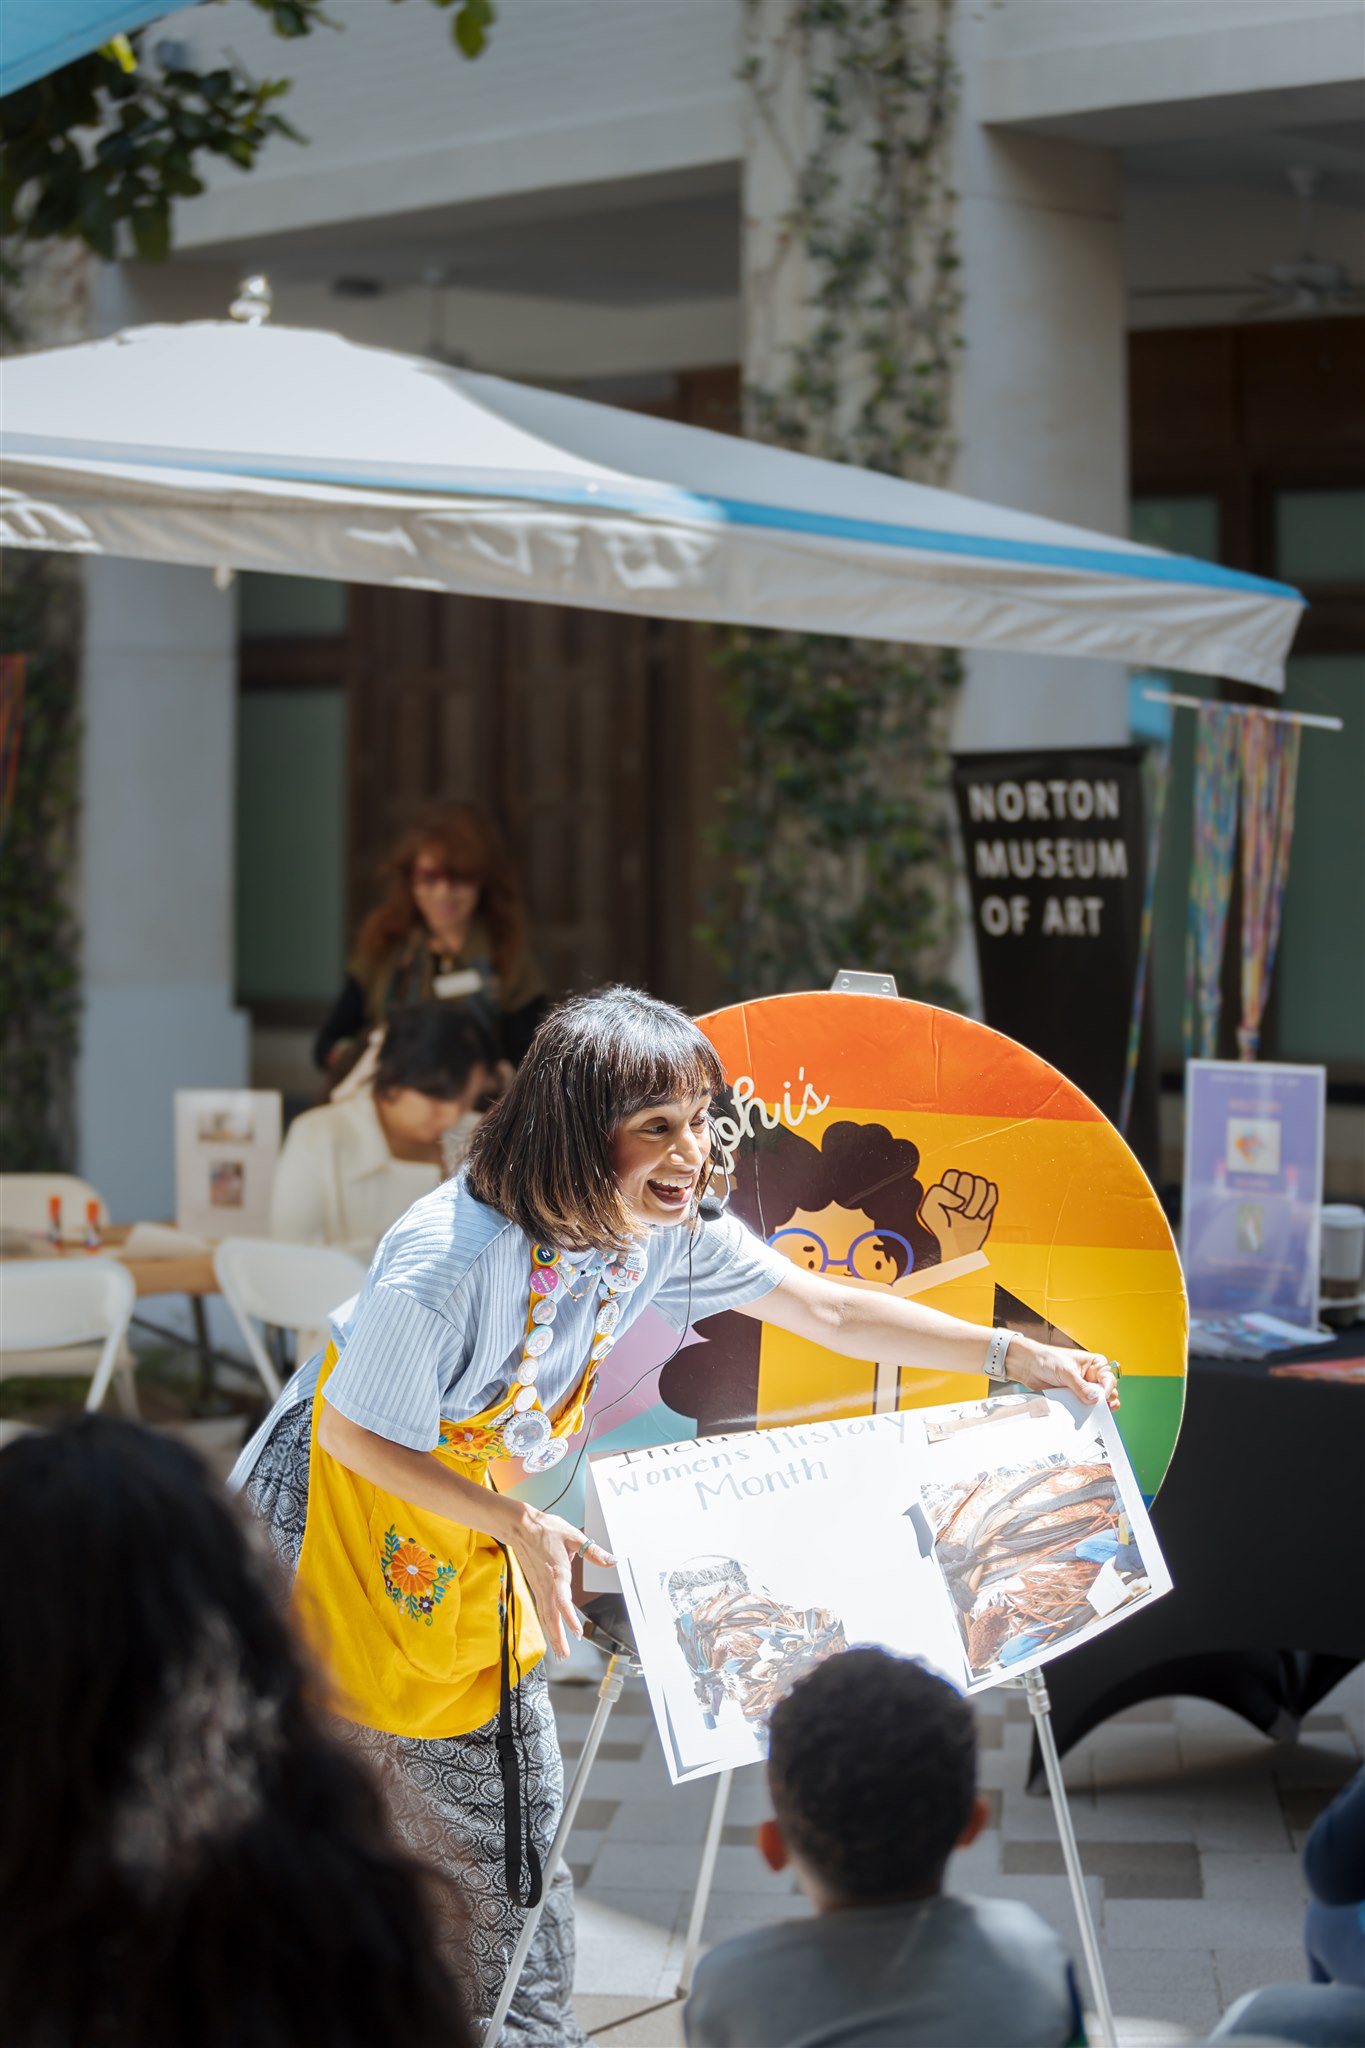 Rohi's Readery hosts a story time with The Norton Museum